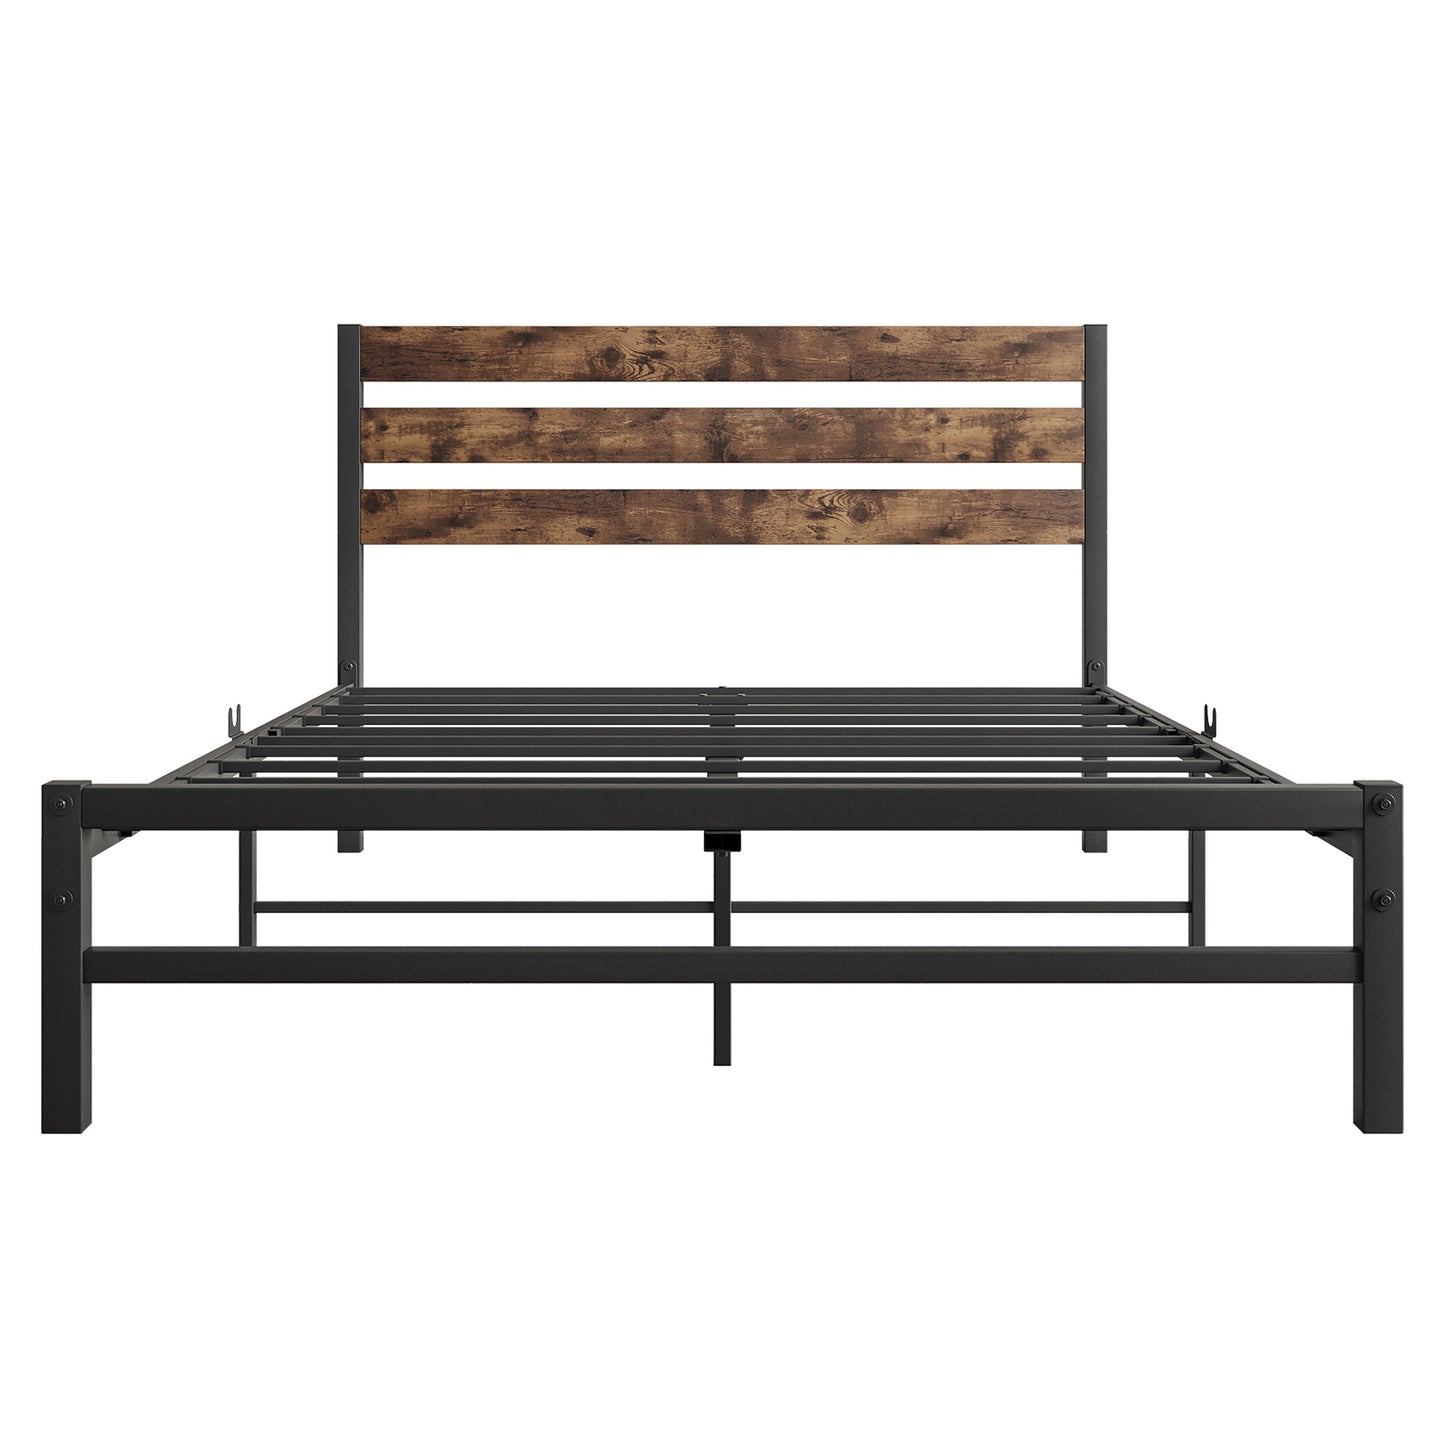 SYNGAR Black Full Size Bed Frame with Wooden Industrial Headboard, Iron Platform Bed Frame Full Metal Bed Mattress Foundation with 400LBS Capacity, No Box Spring Needed, Noise Free